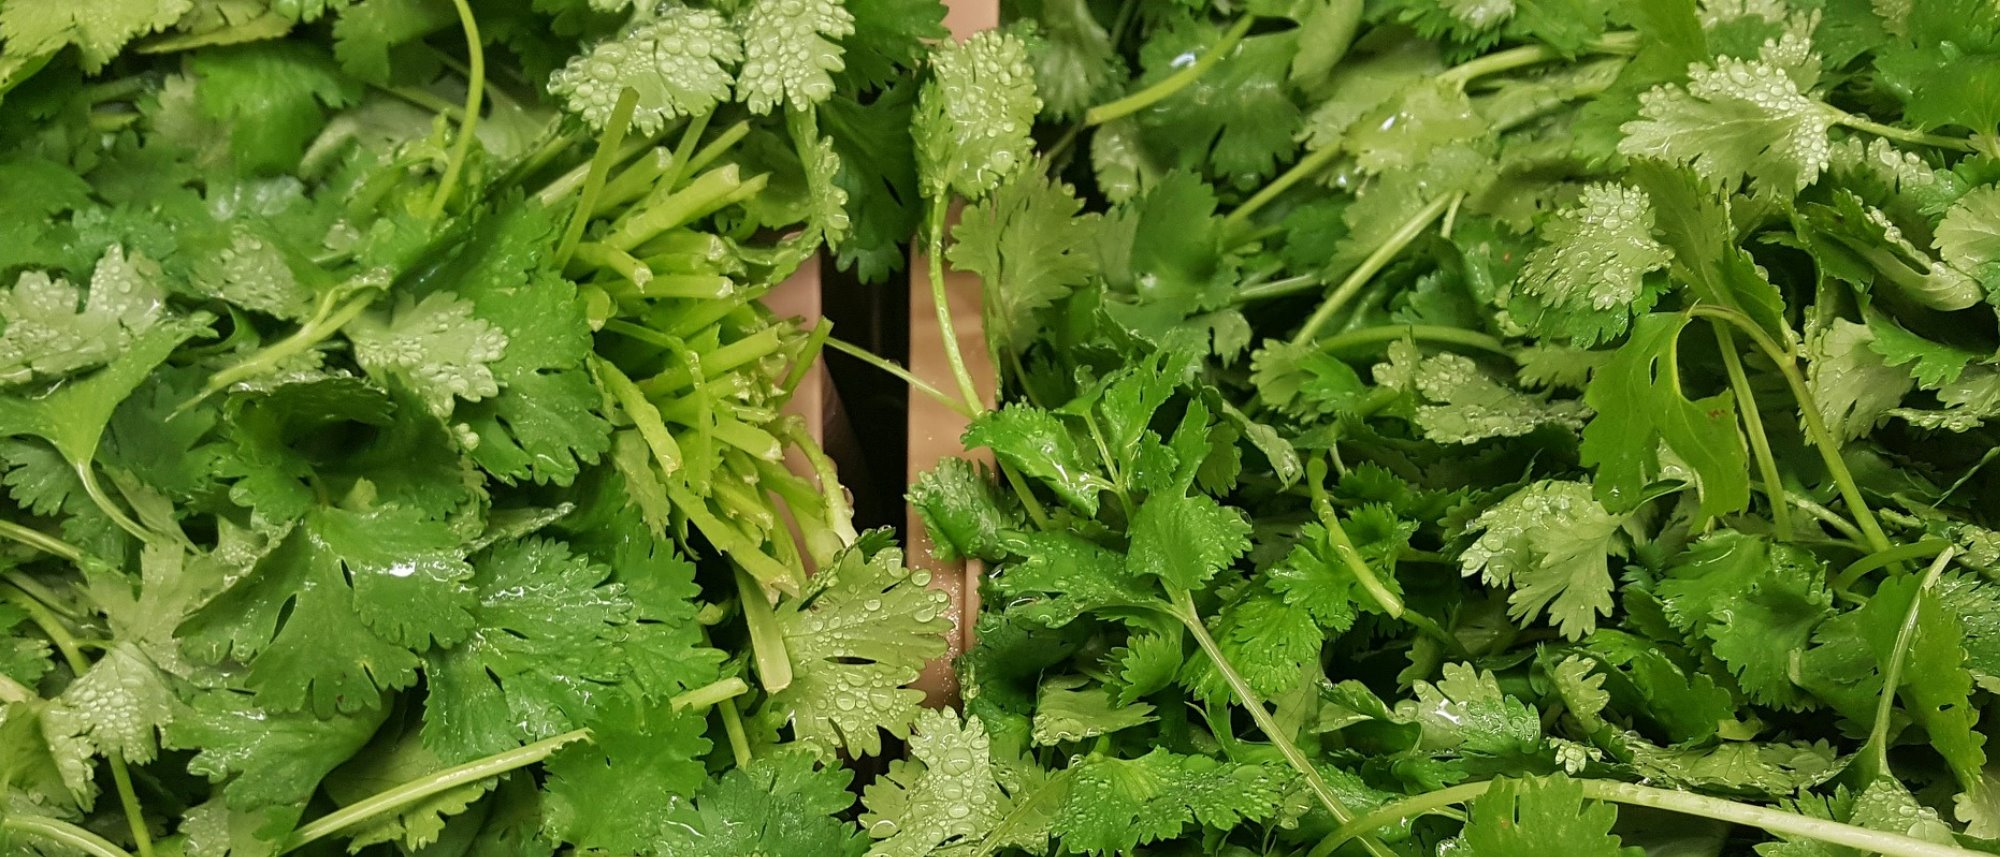 Grow zesty cilantro to use in the kitchen